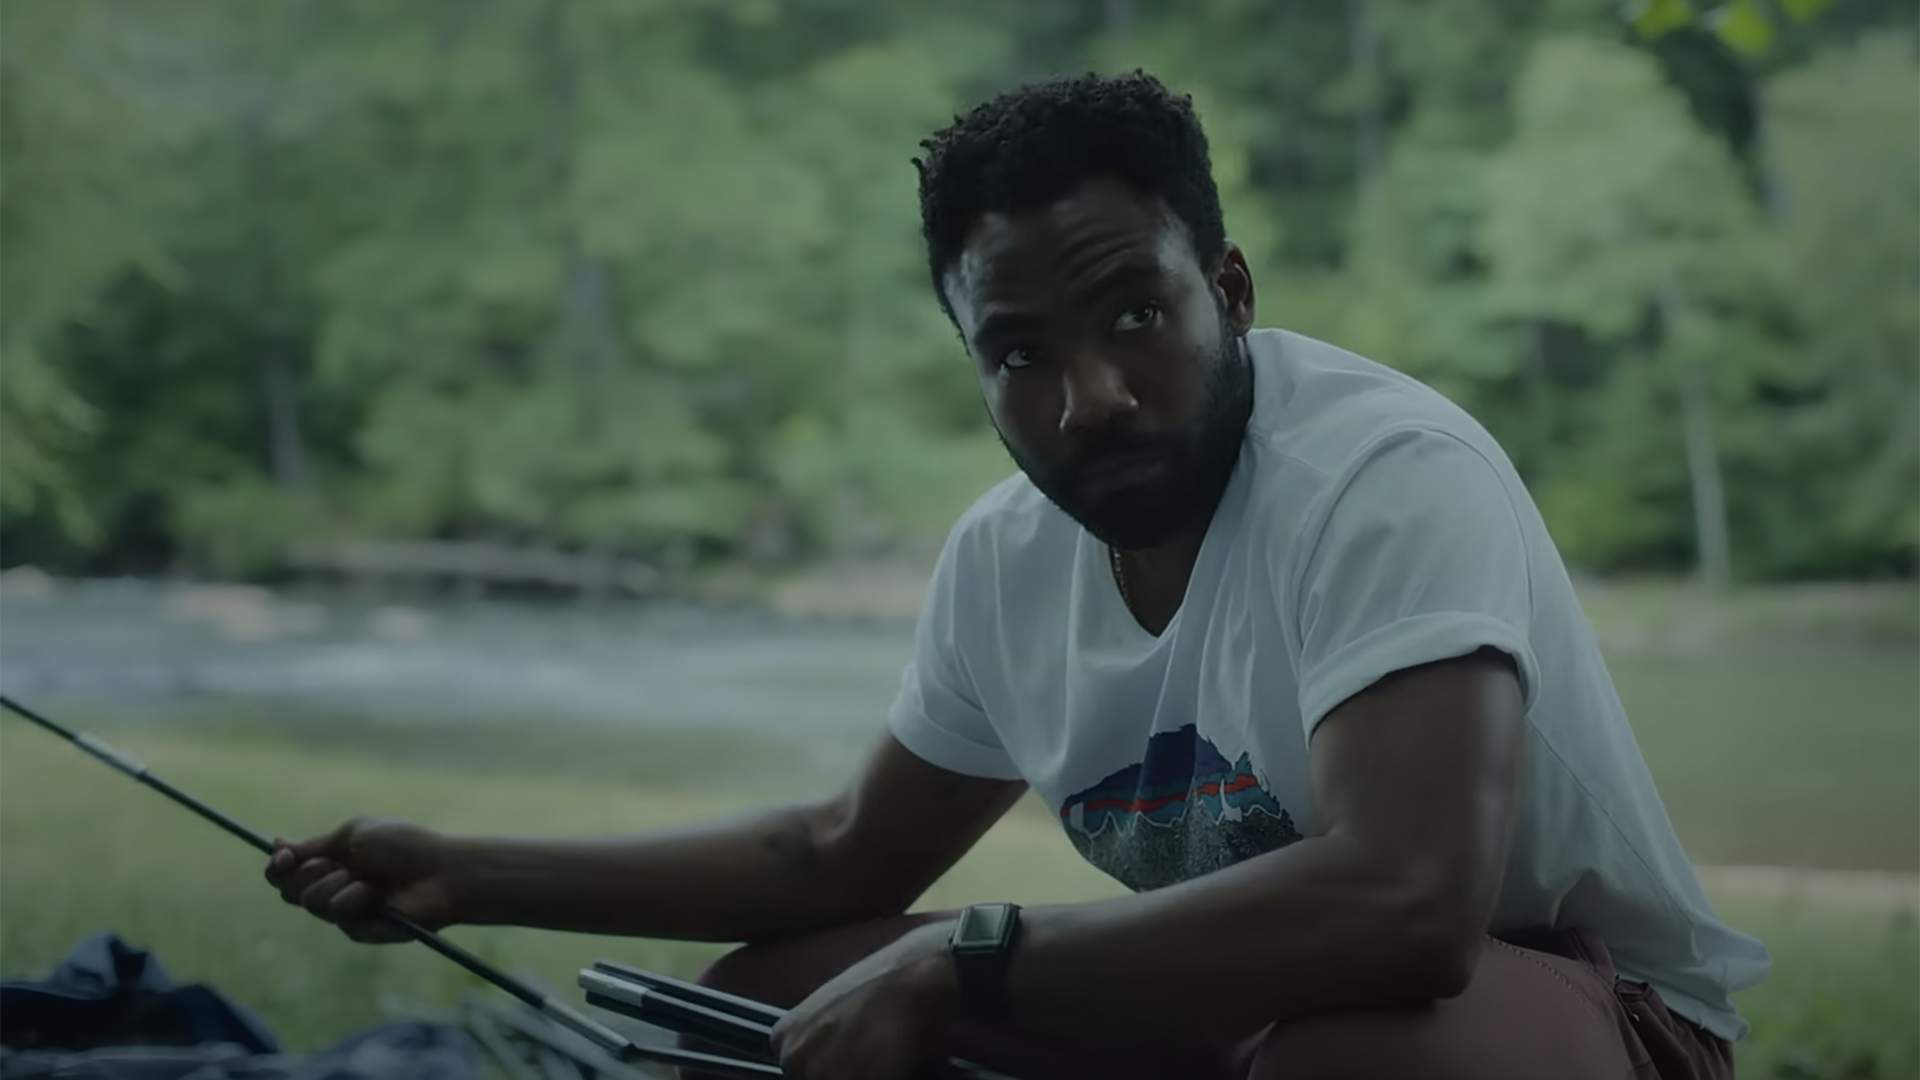 Donald Glover's 'Atlanta' Works Towards Its Endgame in the Trailer for Its Fourth and Final Season